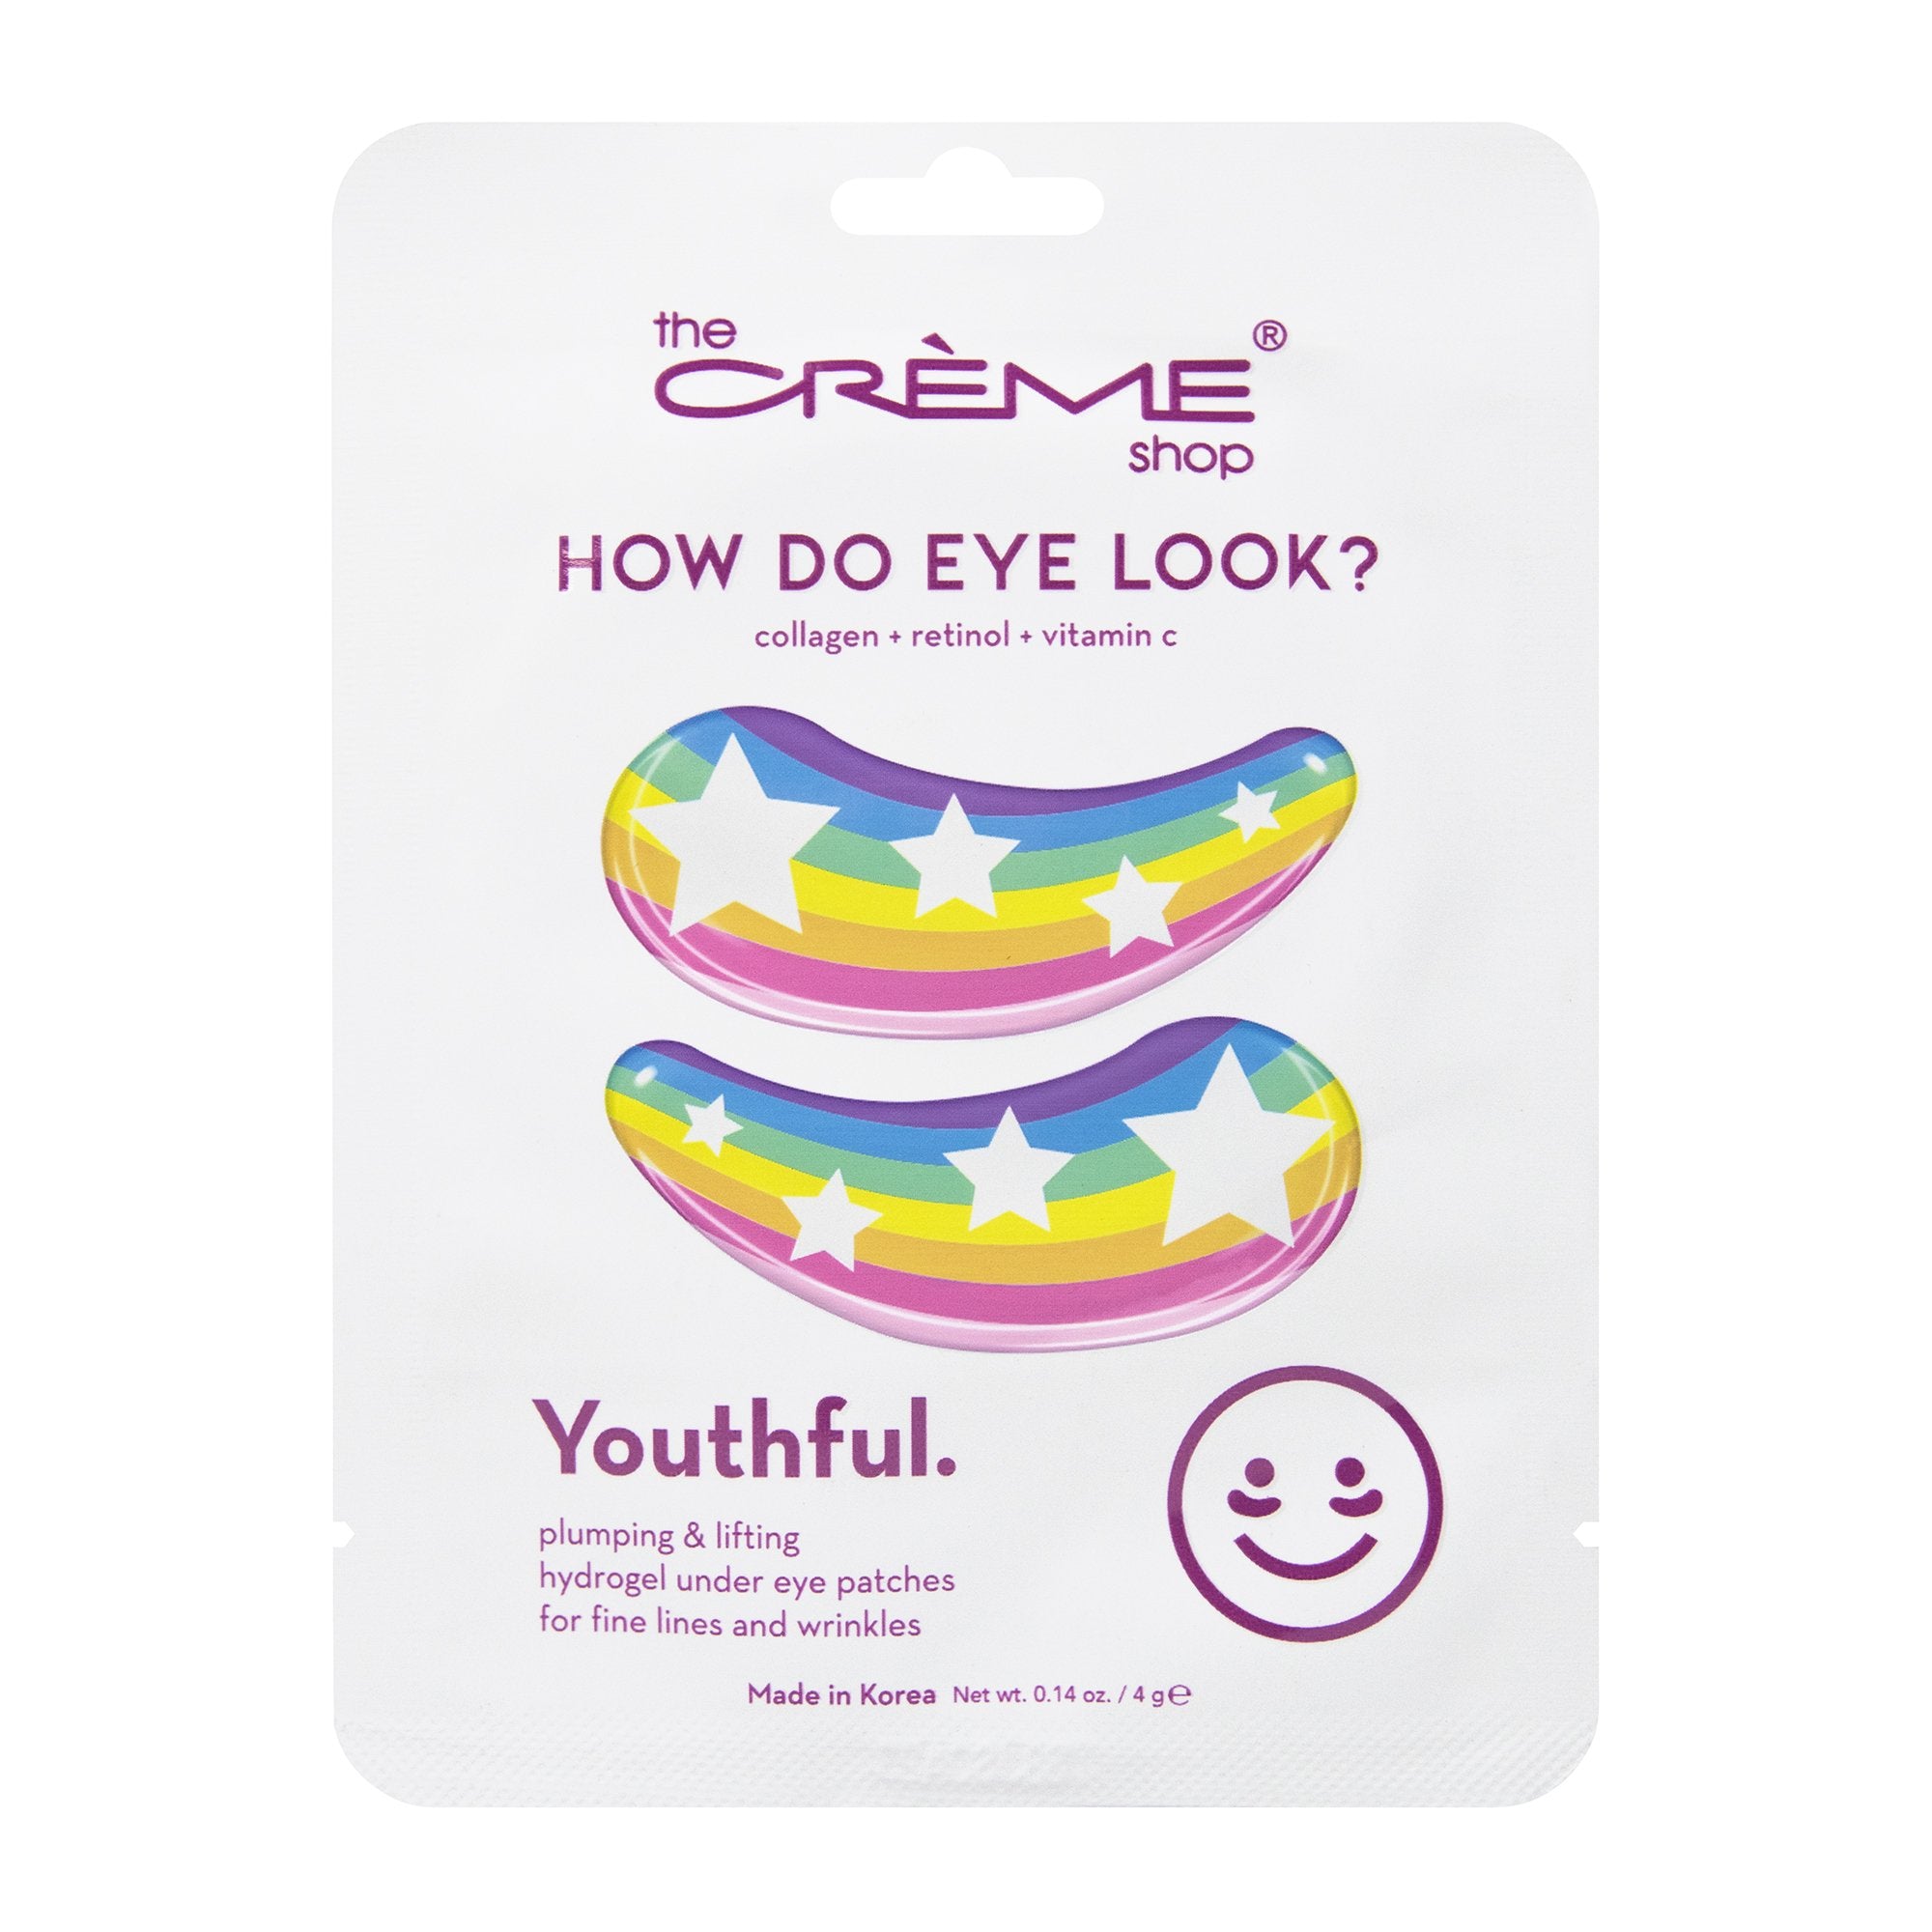 How Do Eye Look? - Youthful Under Eye Patches for plumping & lifting Under Eye Patches The Crème Shop 